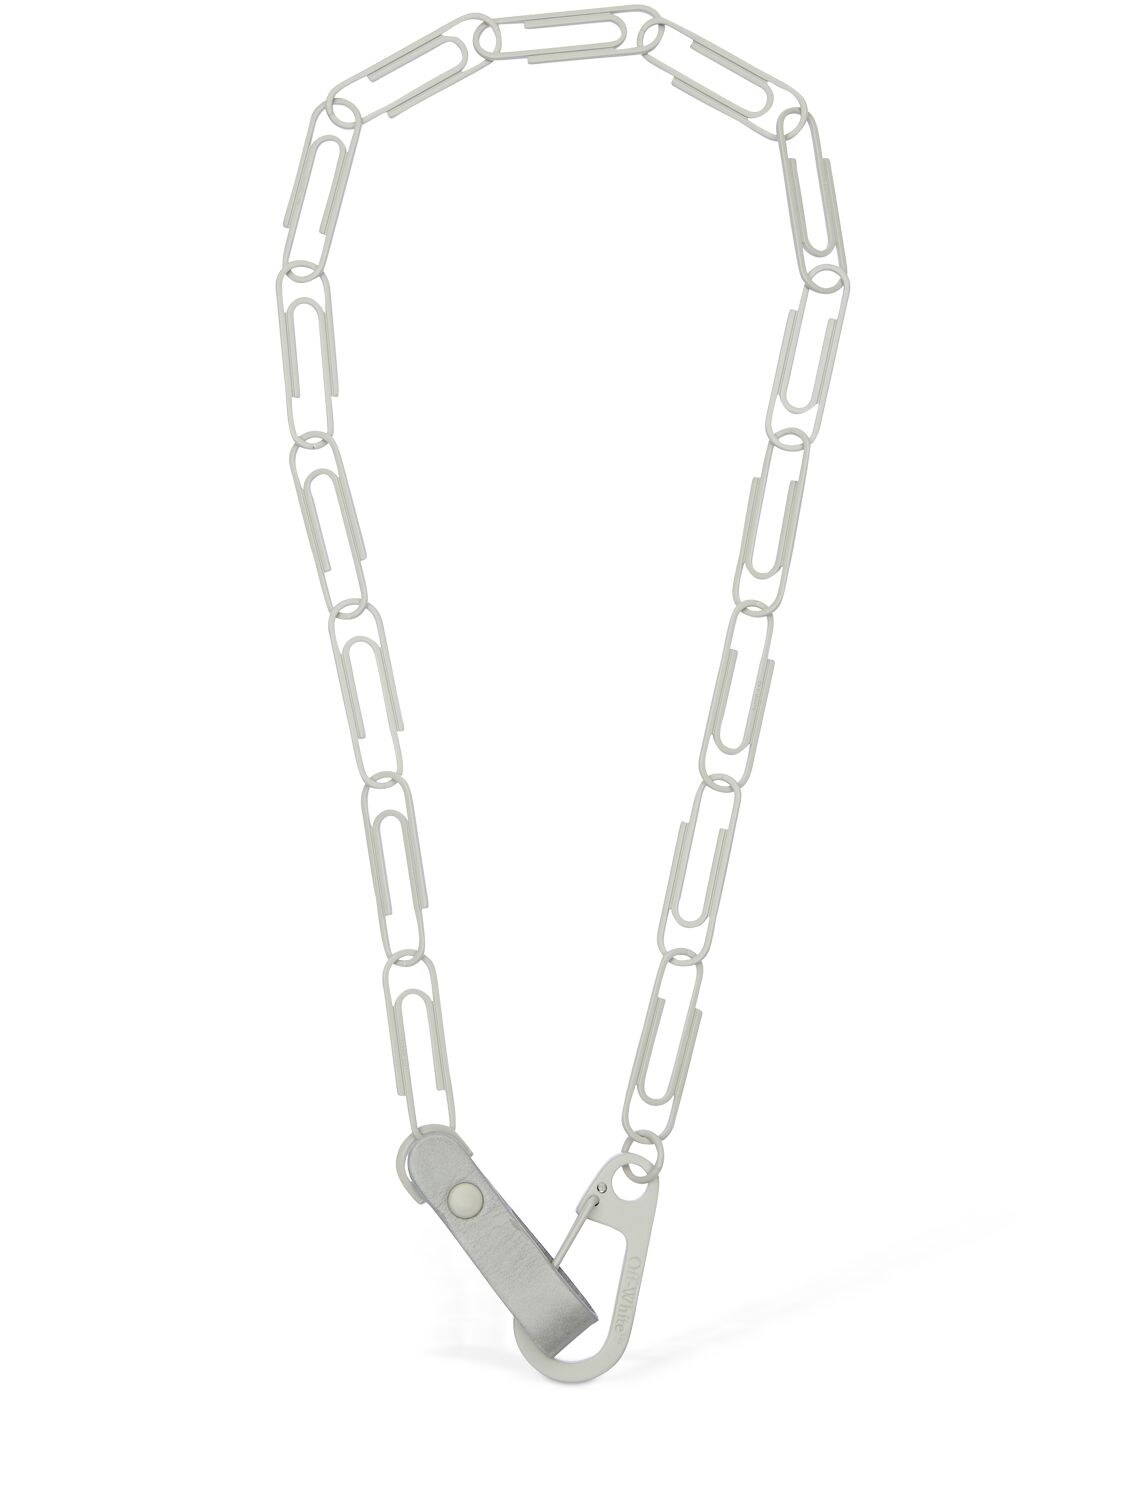 OFF-WHITE Texturized Paperclip Necklace